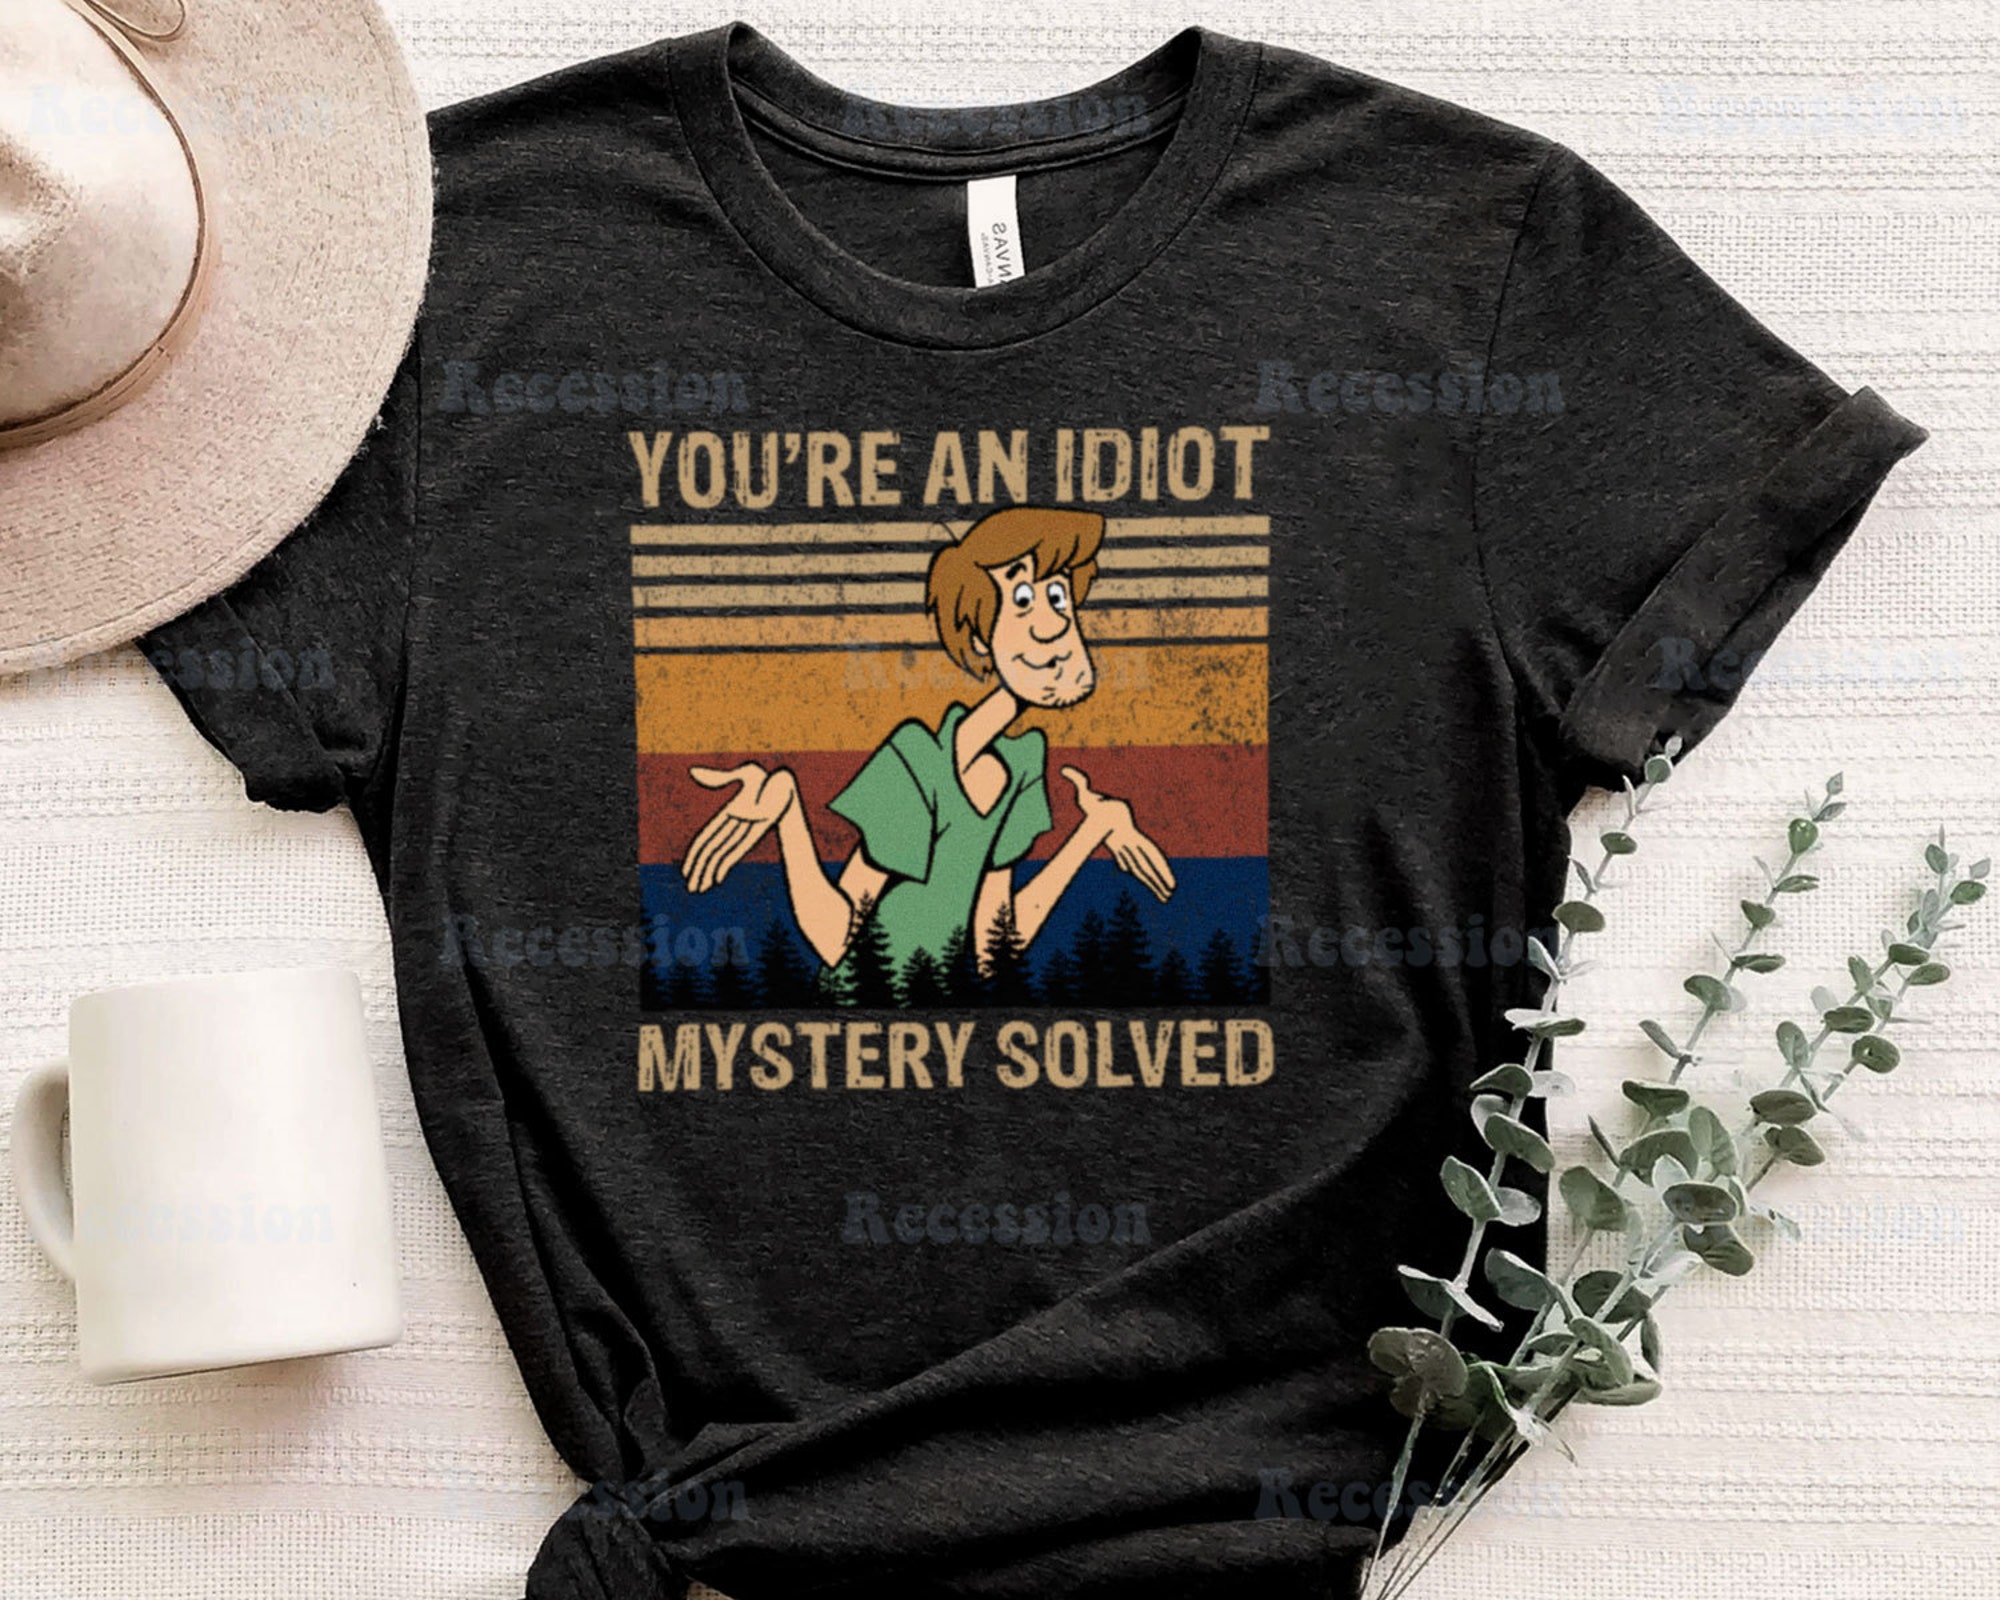 Scooby Doo Scooby-Doo Shirt You're An Idiot Mystery Solved Tee